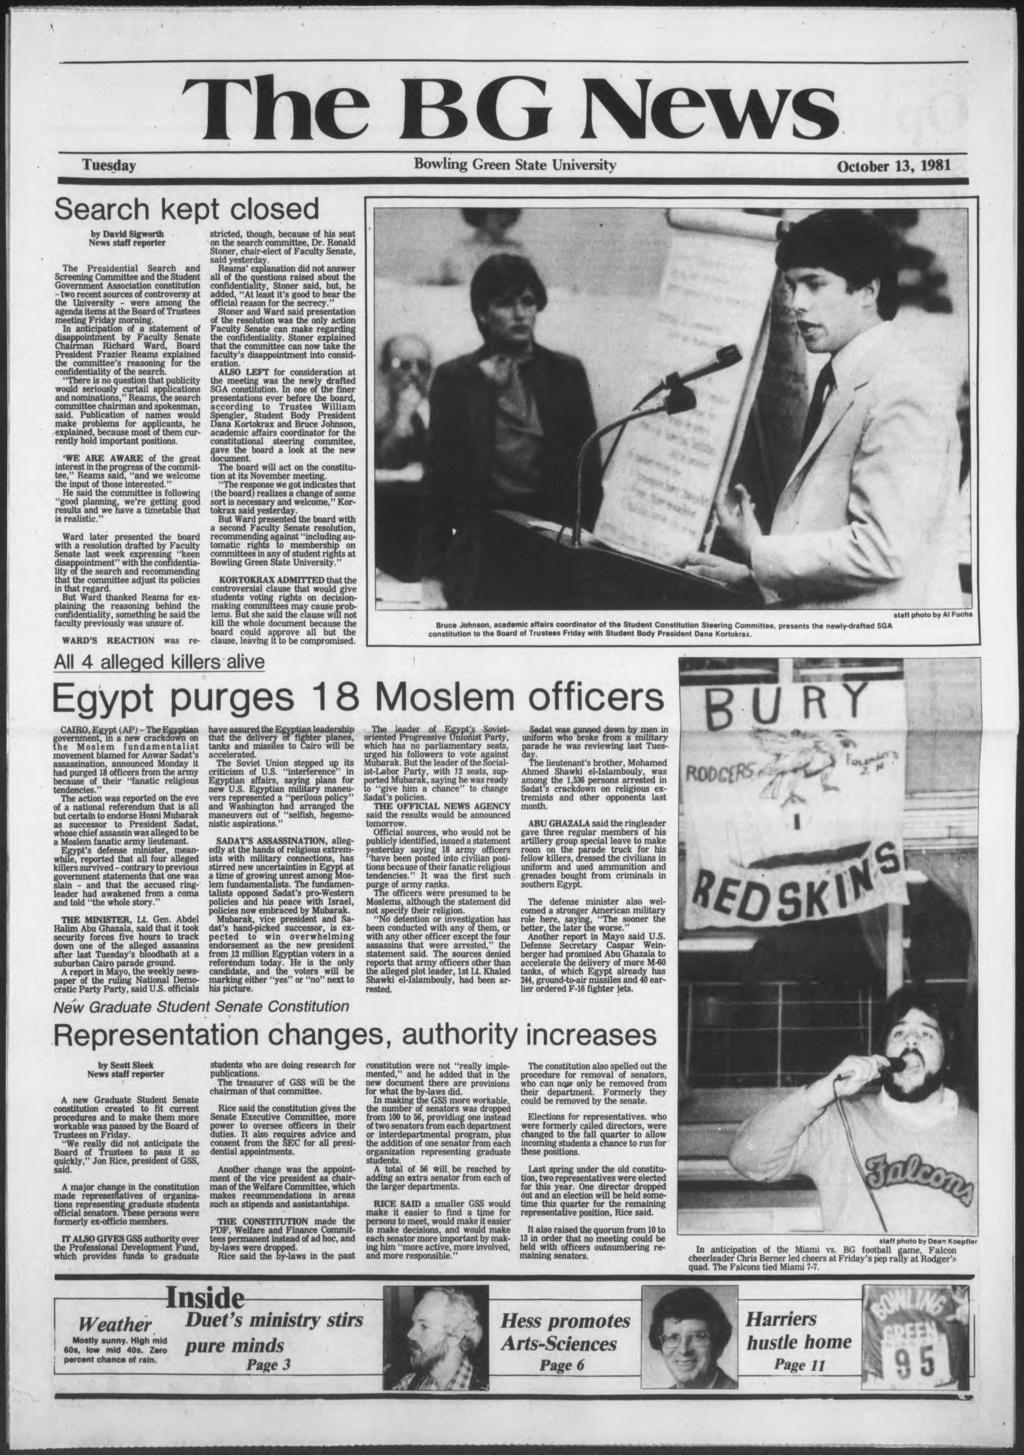 The B G News Tuesday Bowlng Green State Unversty October 13, 1981 Search kept closed by Davd Sgworth News staff reporter The Presdental Search and Screenng Commttee and the Student Government